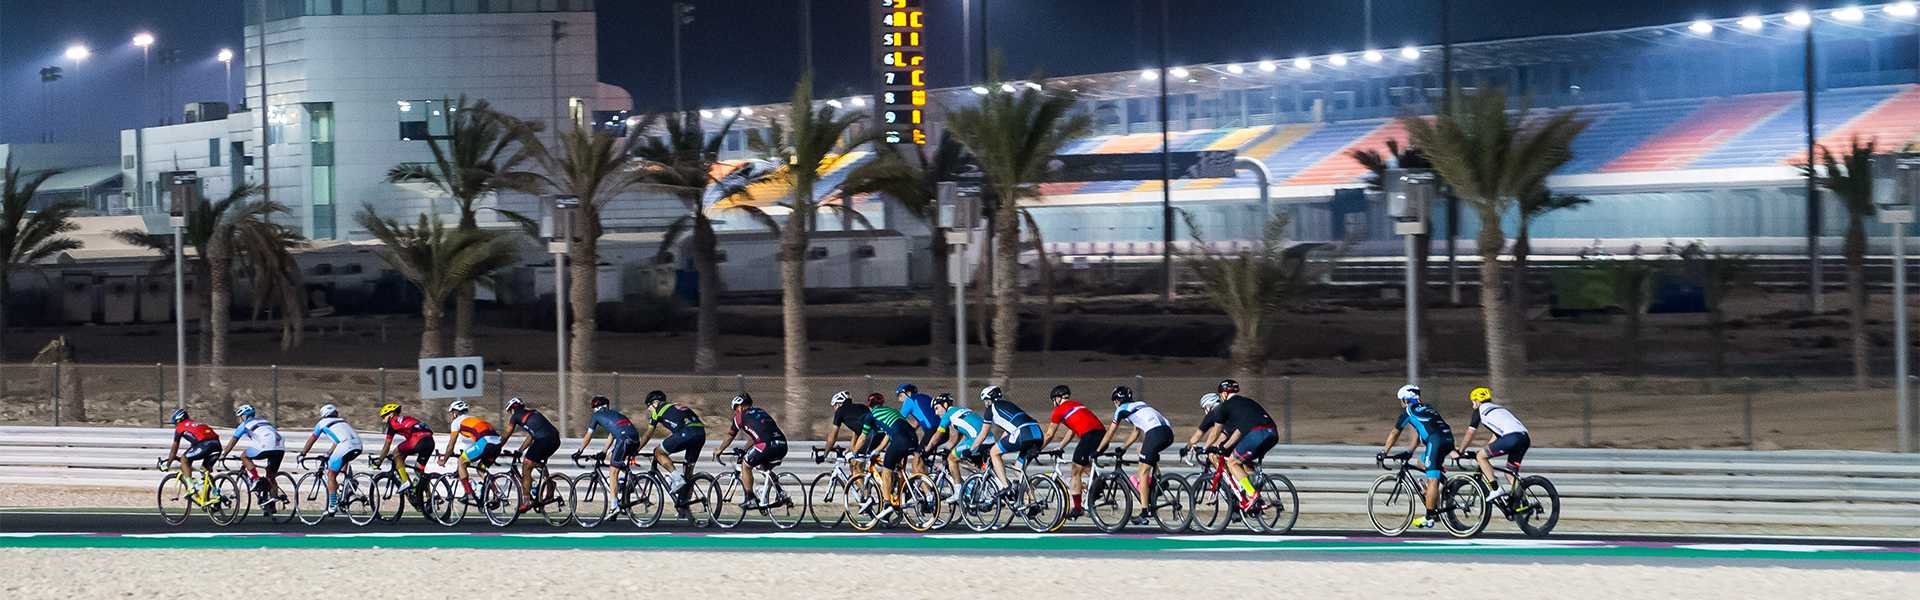 Lusail Circuit Sports Club ready for another season of wide range of activities 